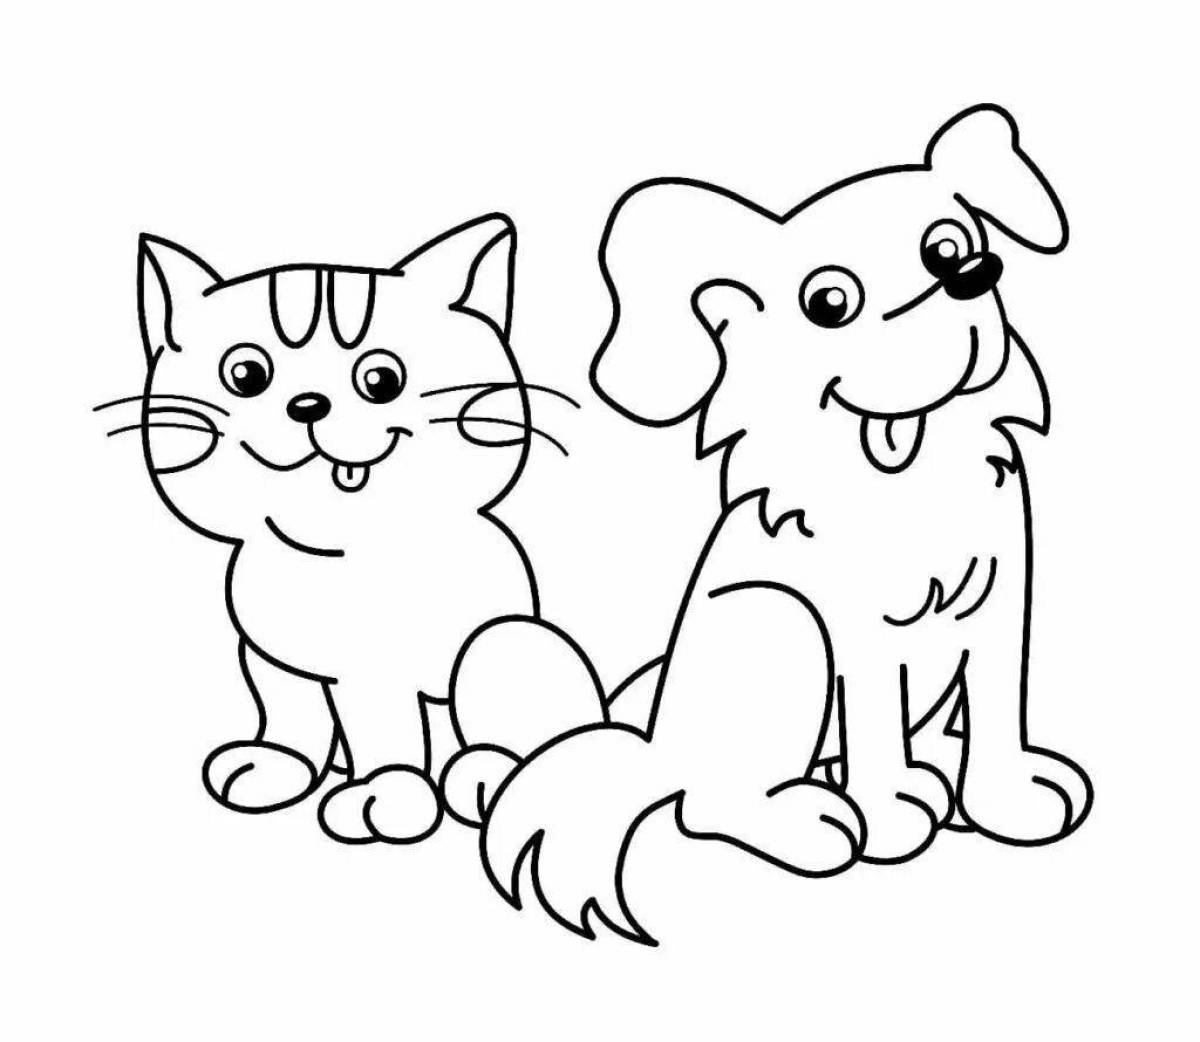 Coloring page happy cat and dog together